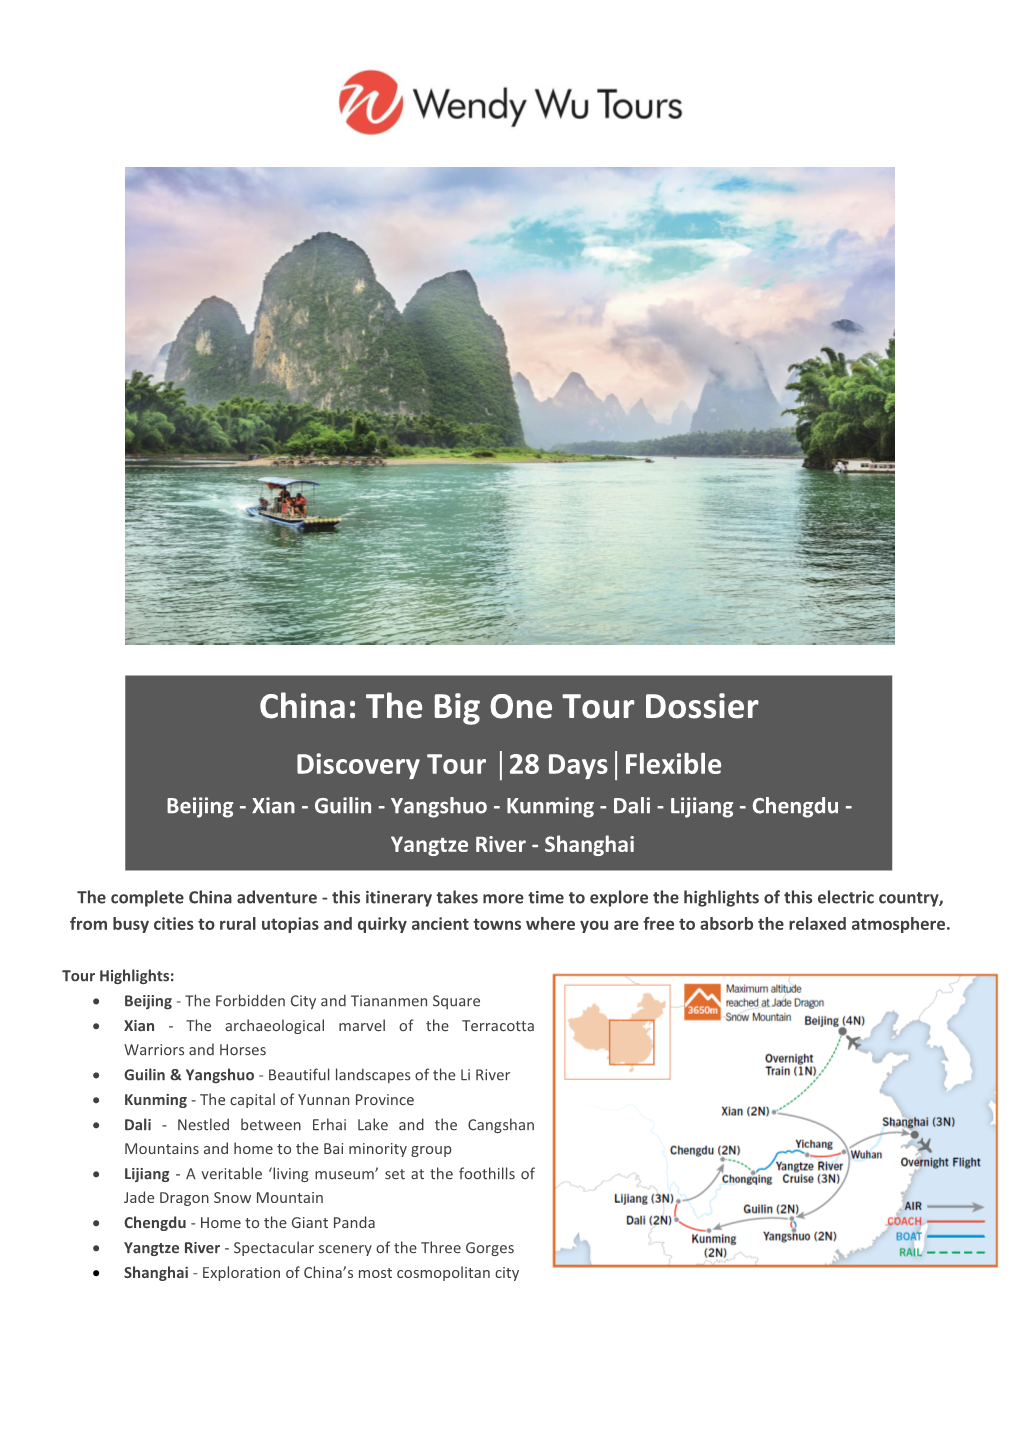 China: the Big One Tour Dossier